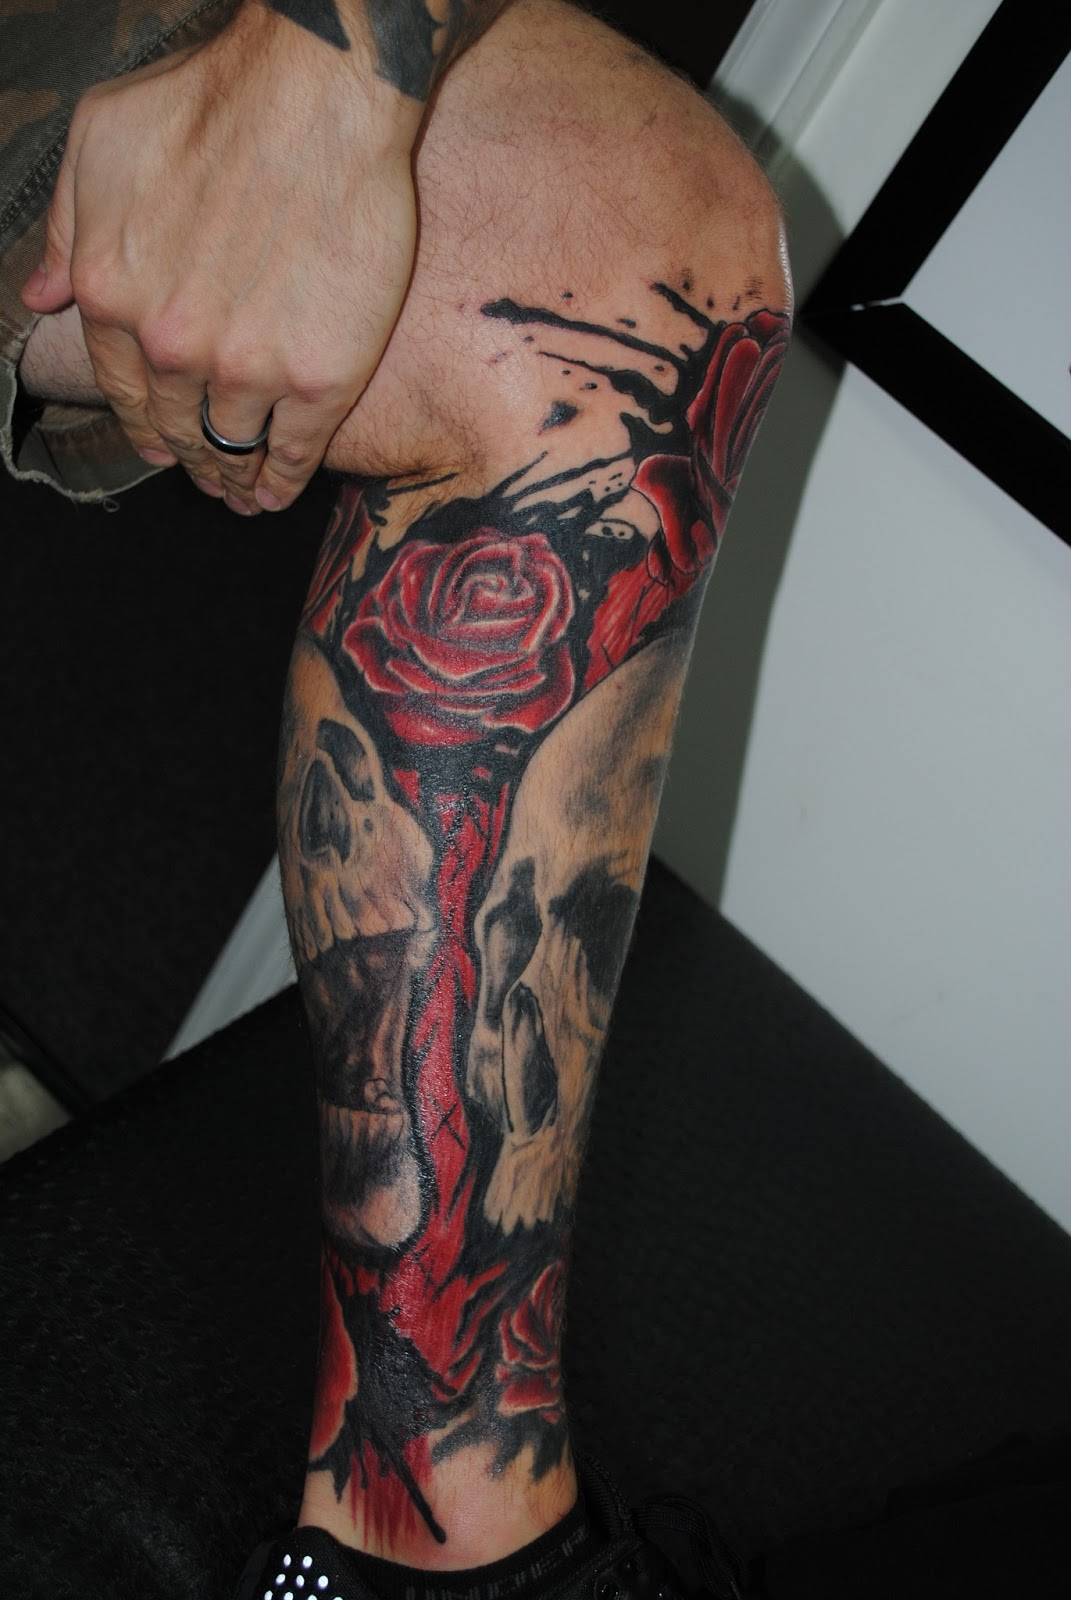 Female Dope Half Sleeve Picture Tattoos Design Idea For Men And Women intended for sizing 1071 X 1600